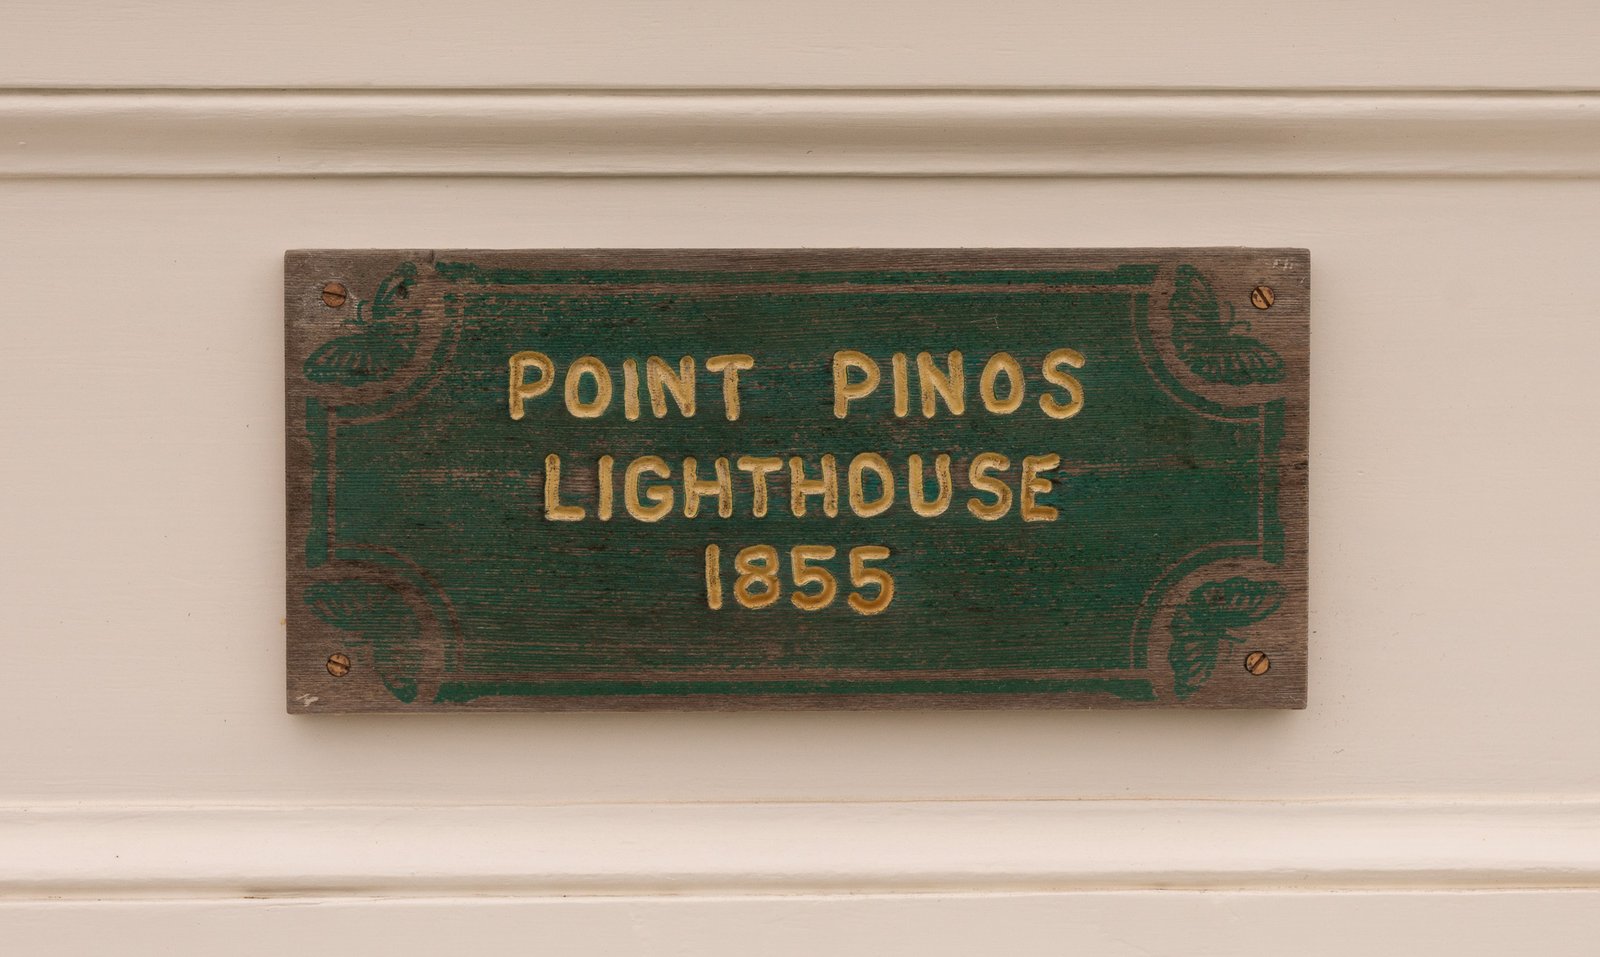 The Point Pinos Lighthouse was built in 1855